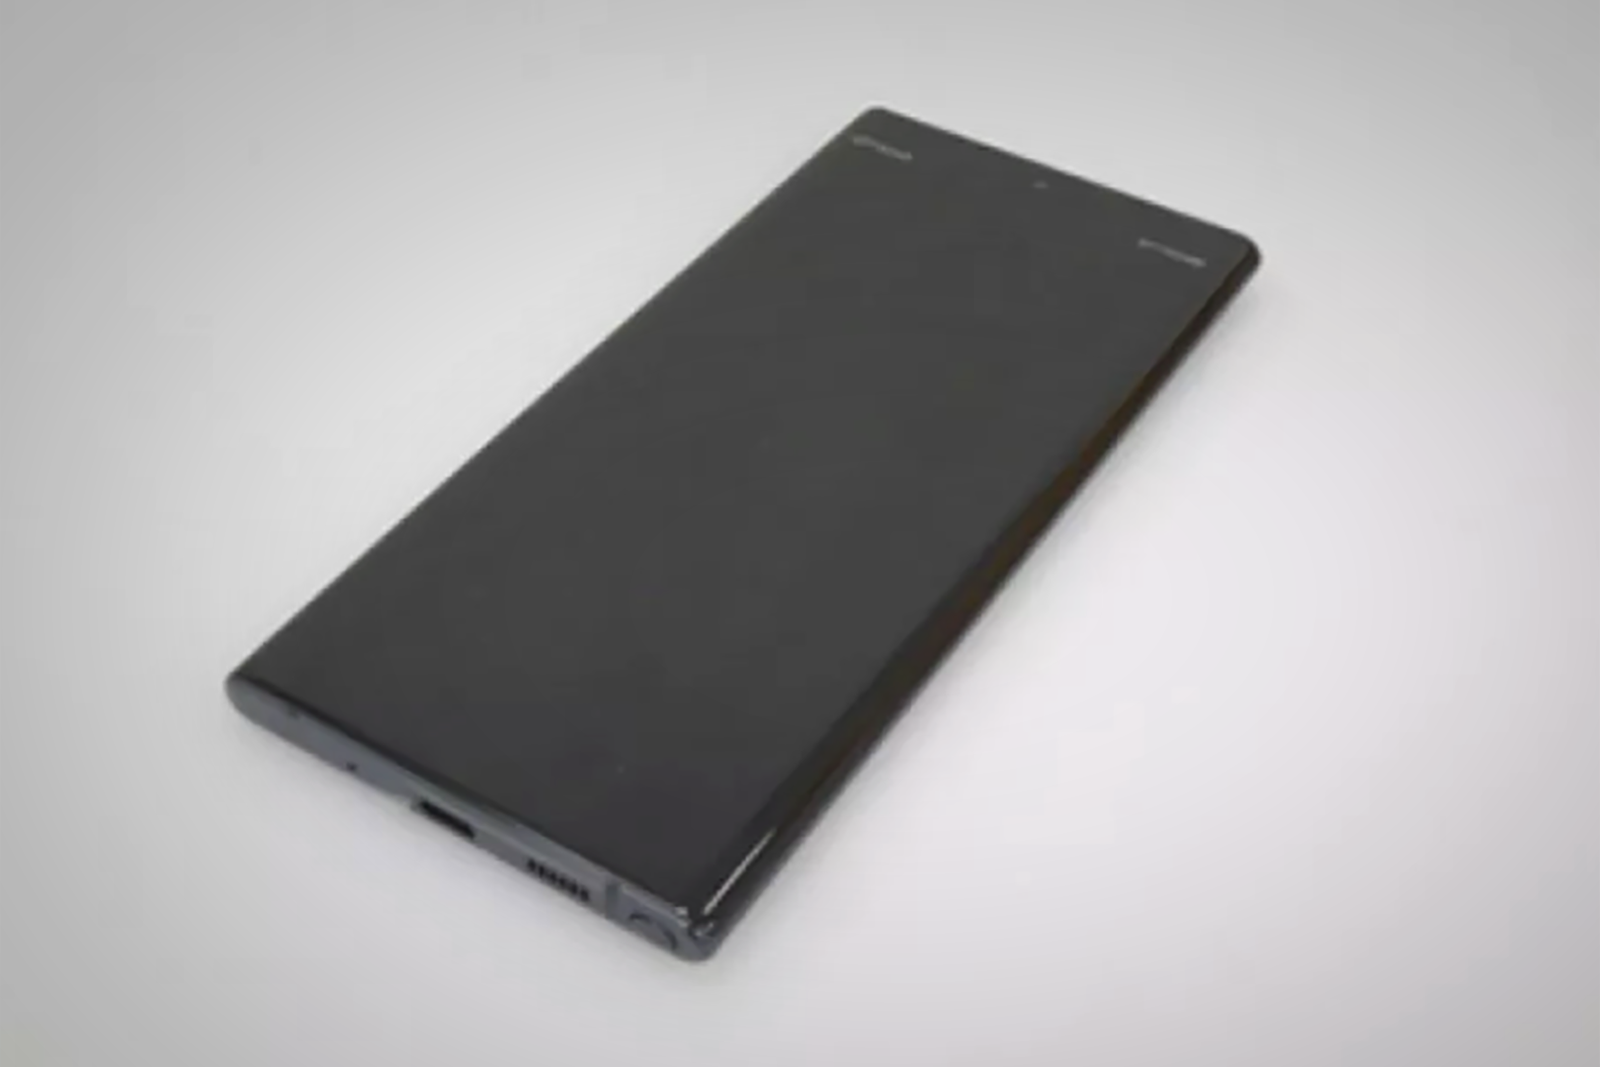 Heres more proof the Note 10 lacks a headphone jack courtesy of FCC image 1